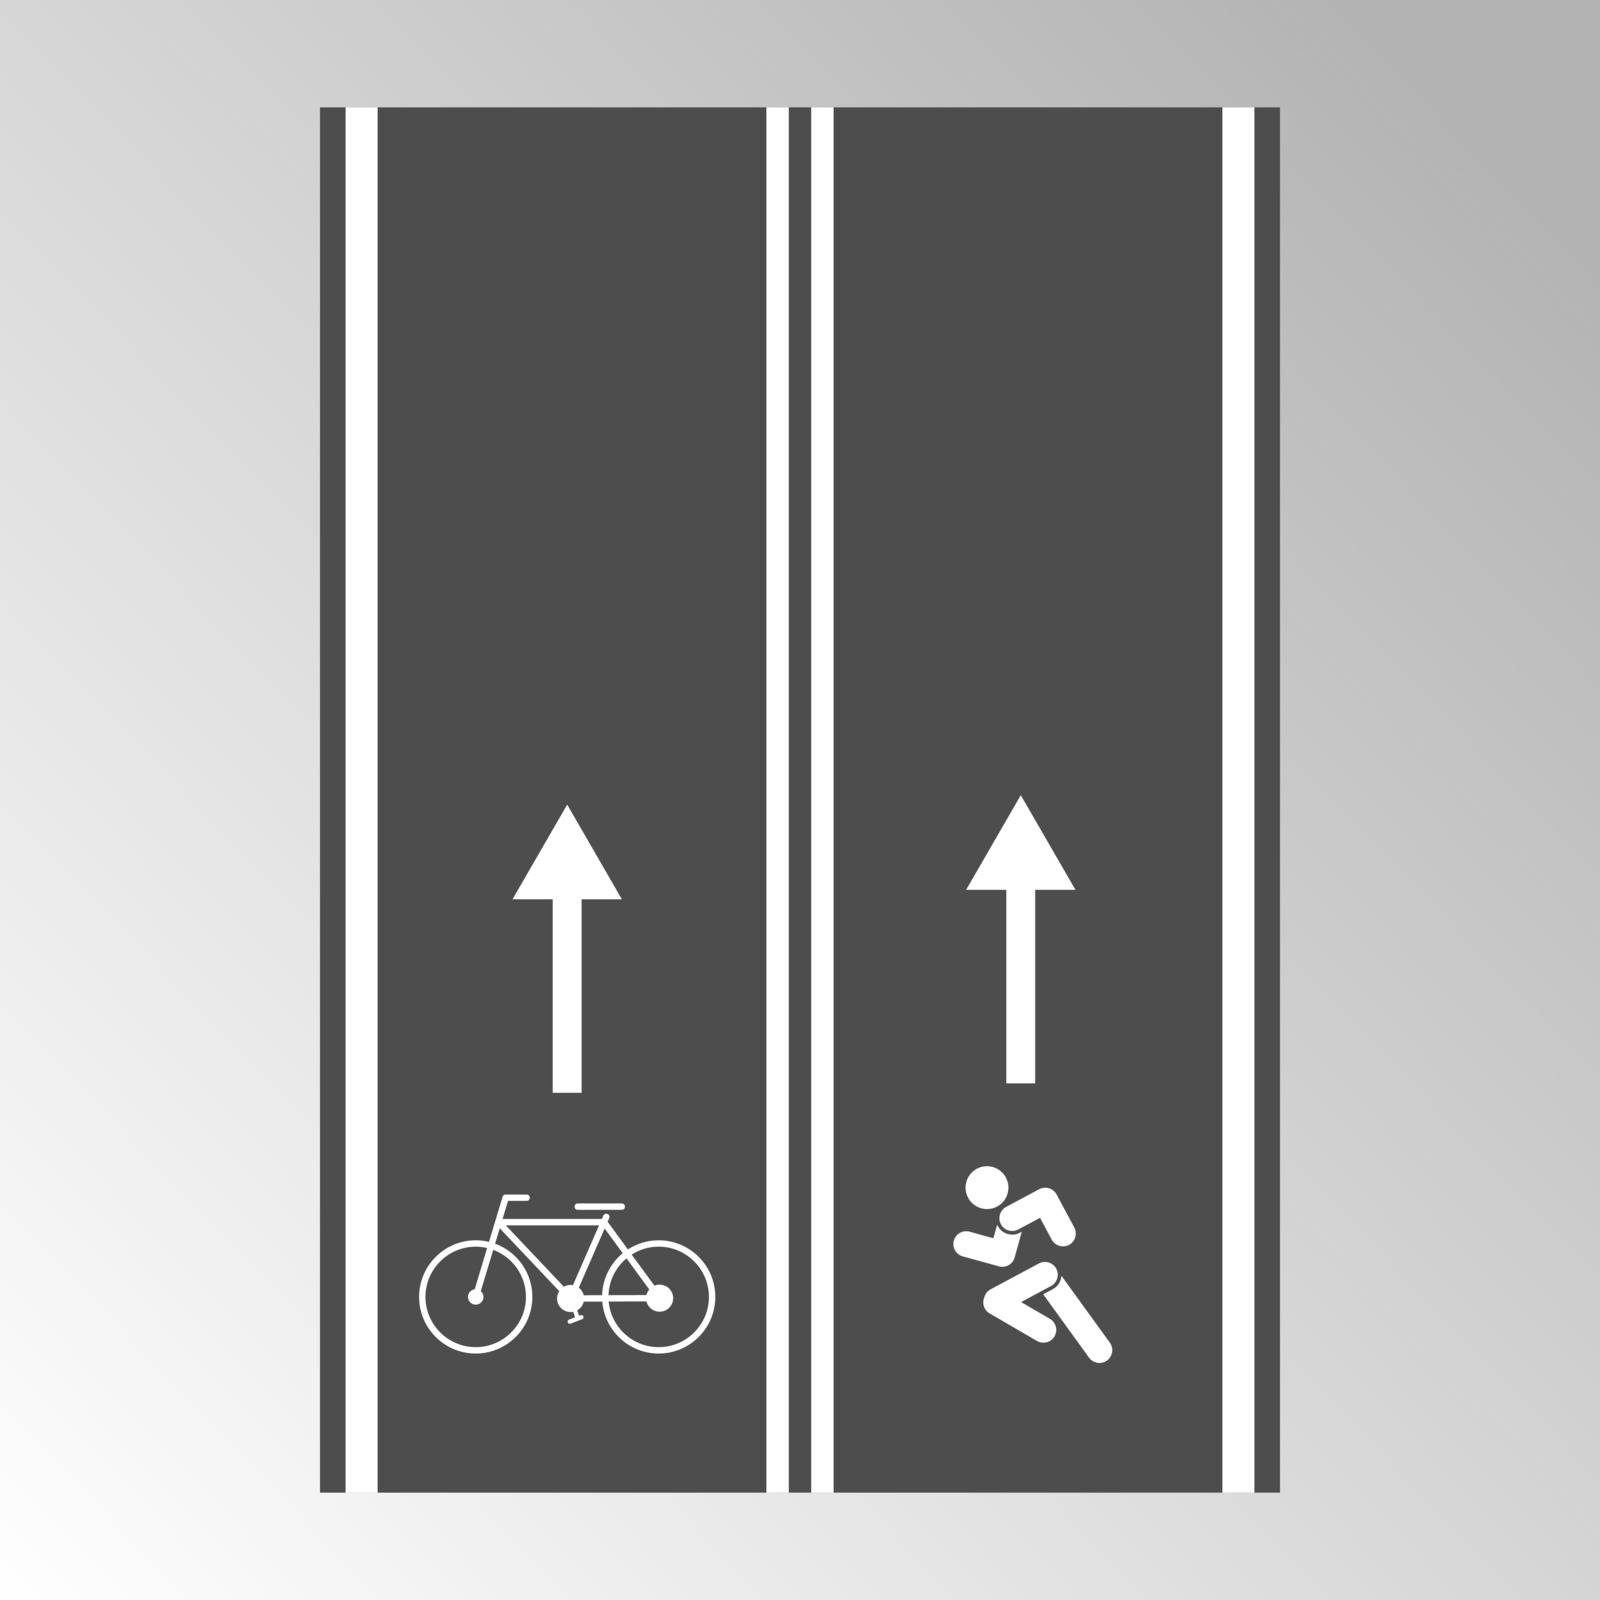 Paved track for running and Cycling with direction signs, flat style.